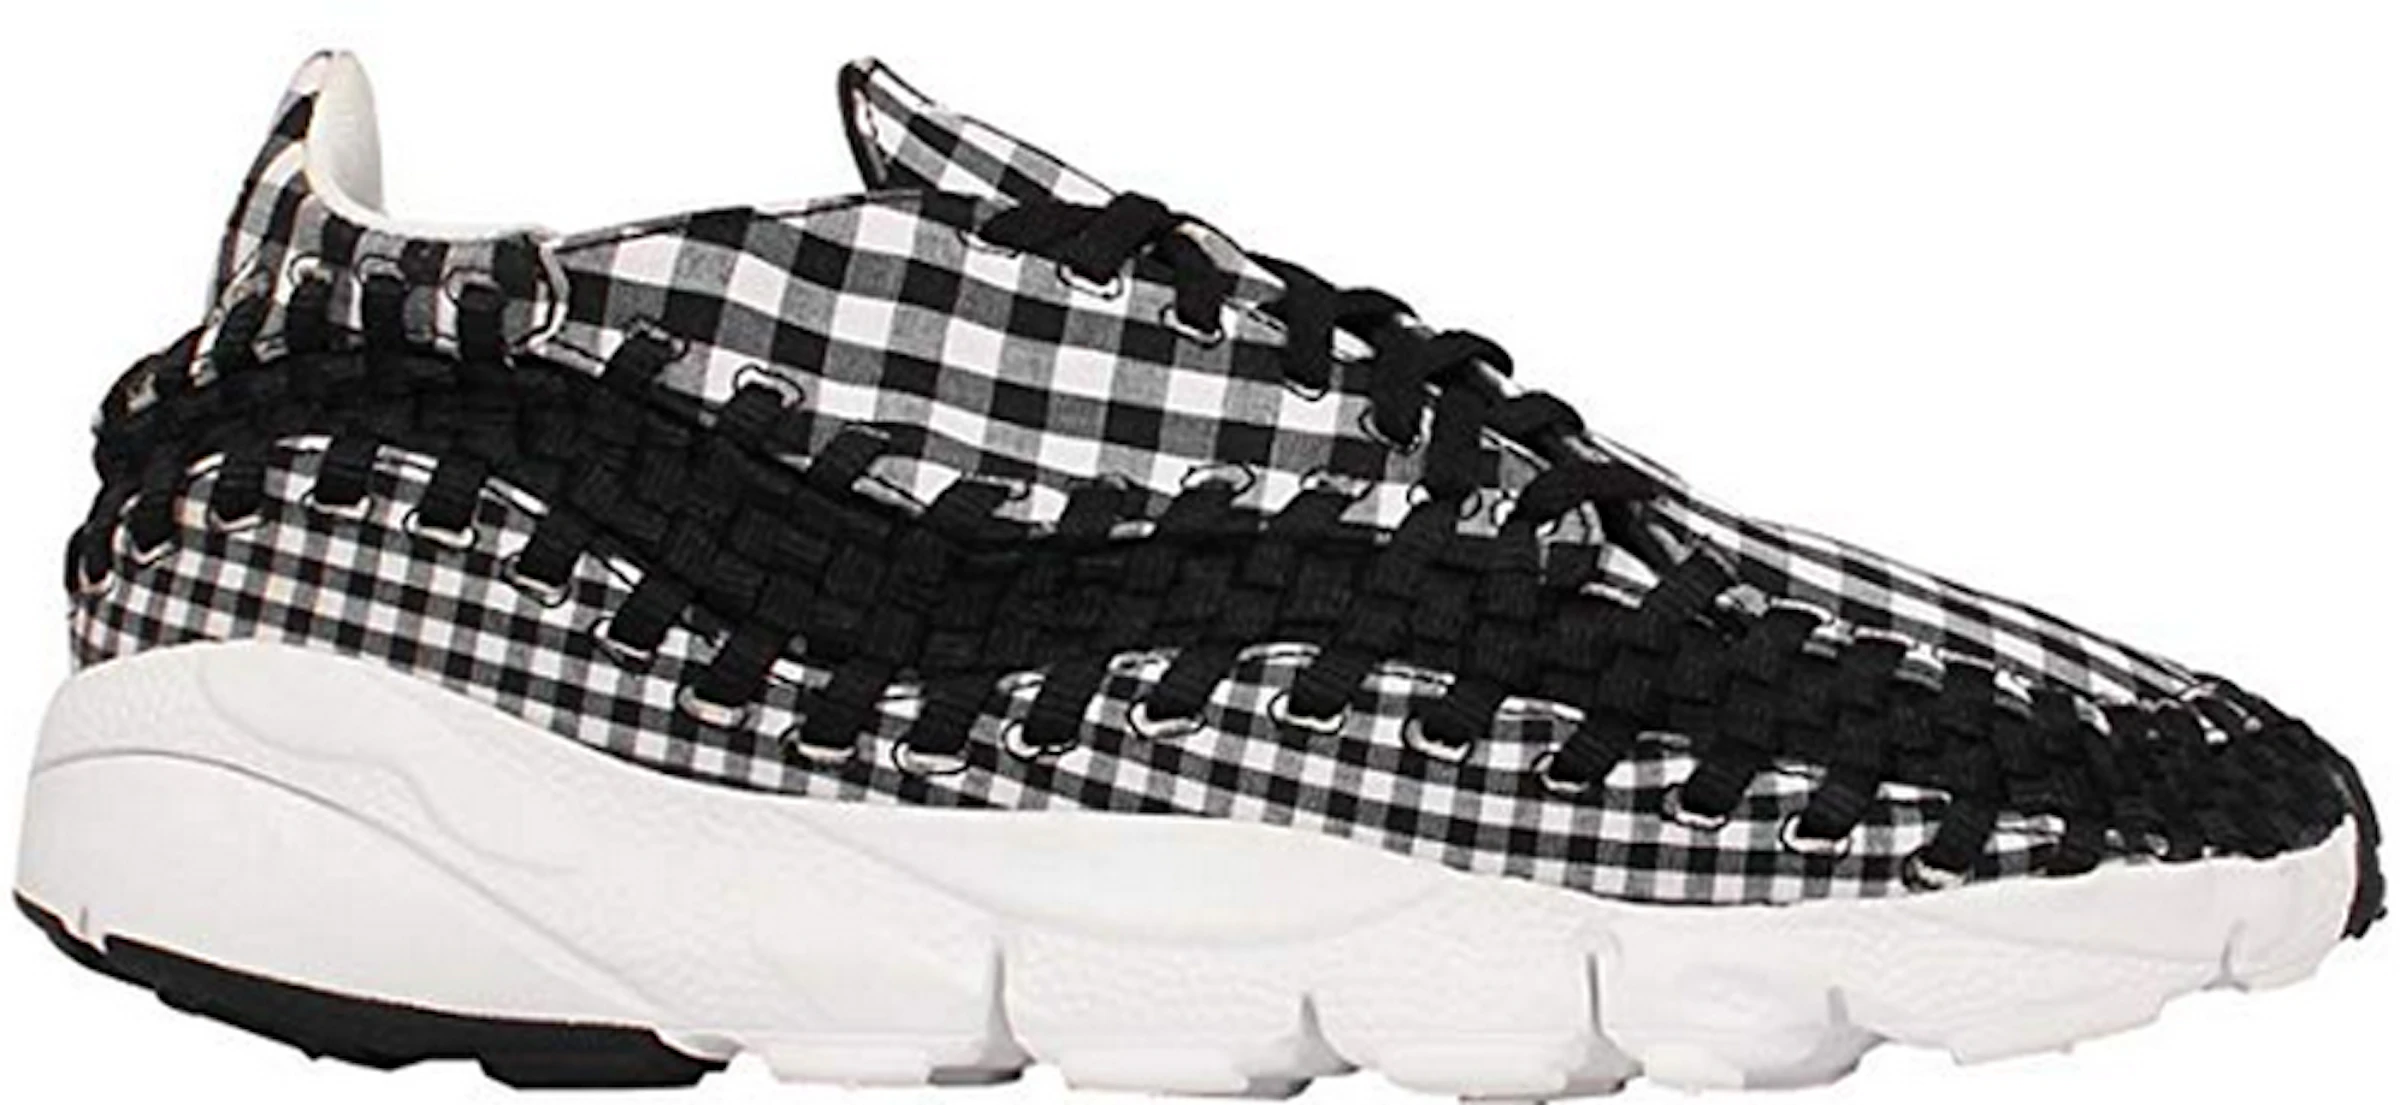 ciclo Panadería Fahrenheit Nike Air Footscape Woven Motion Gingham Pack Black Men's - 417725-001 - US